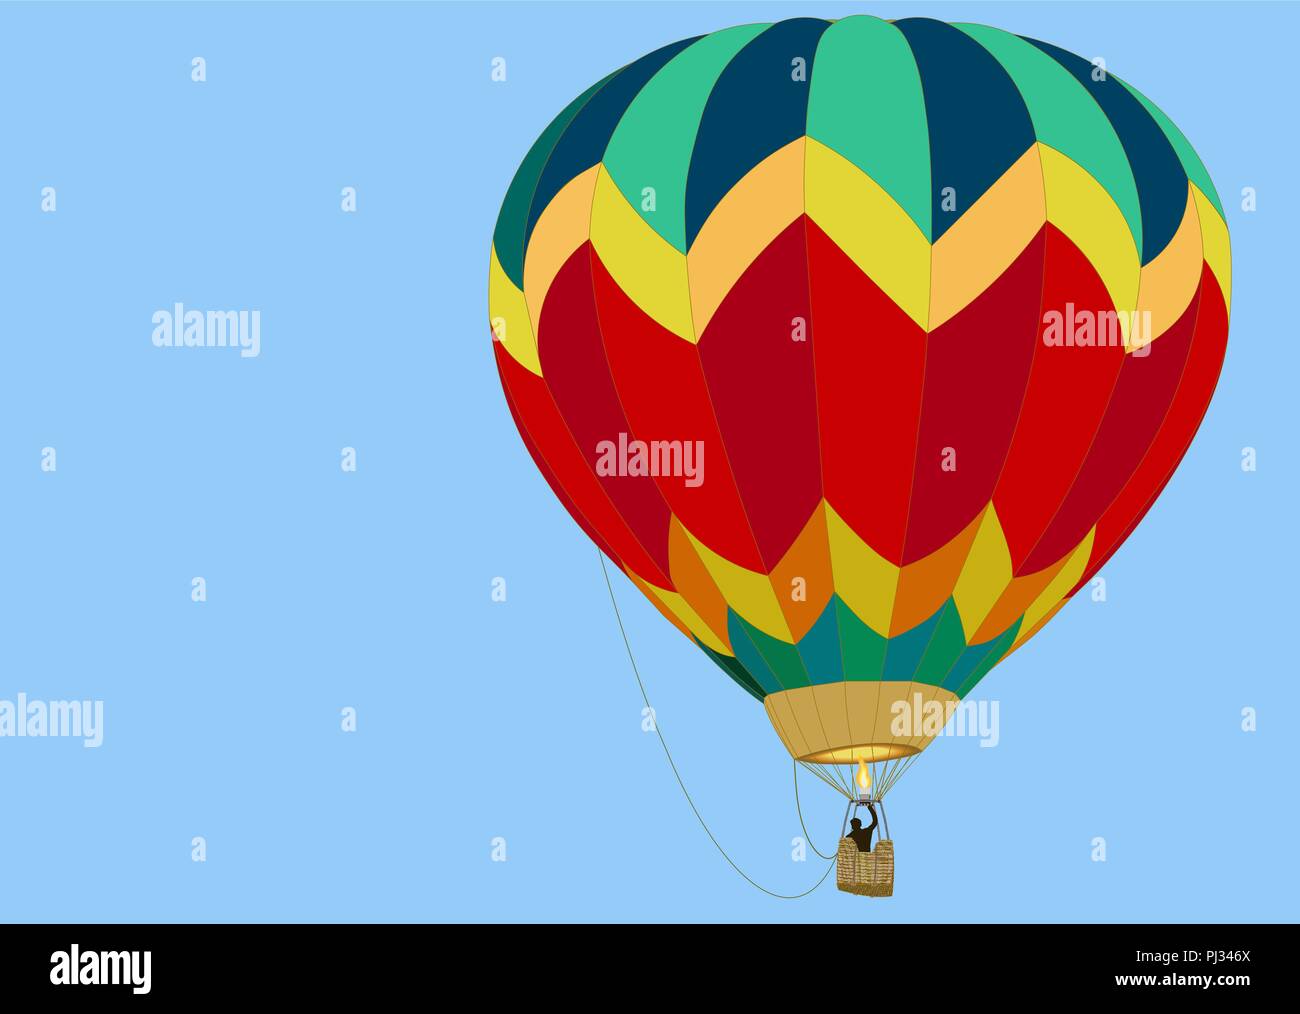 balloon with a basket and a flame from a burner, hovers in a blue sky Stock Vector